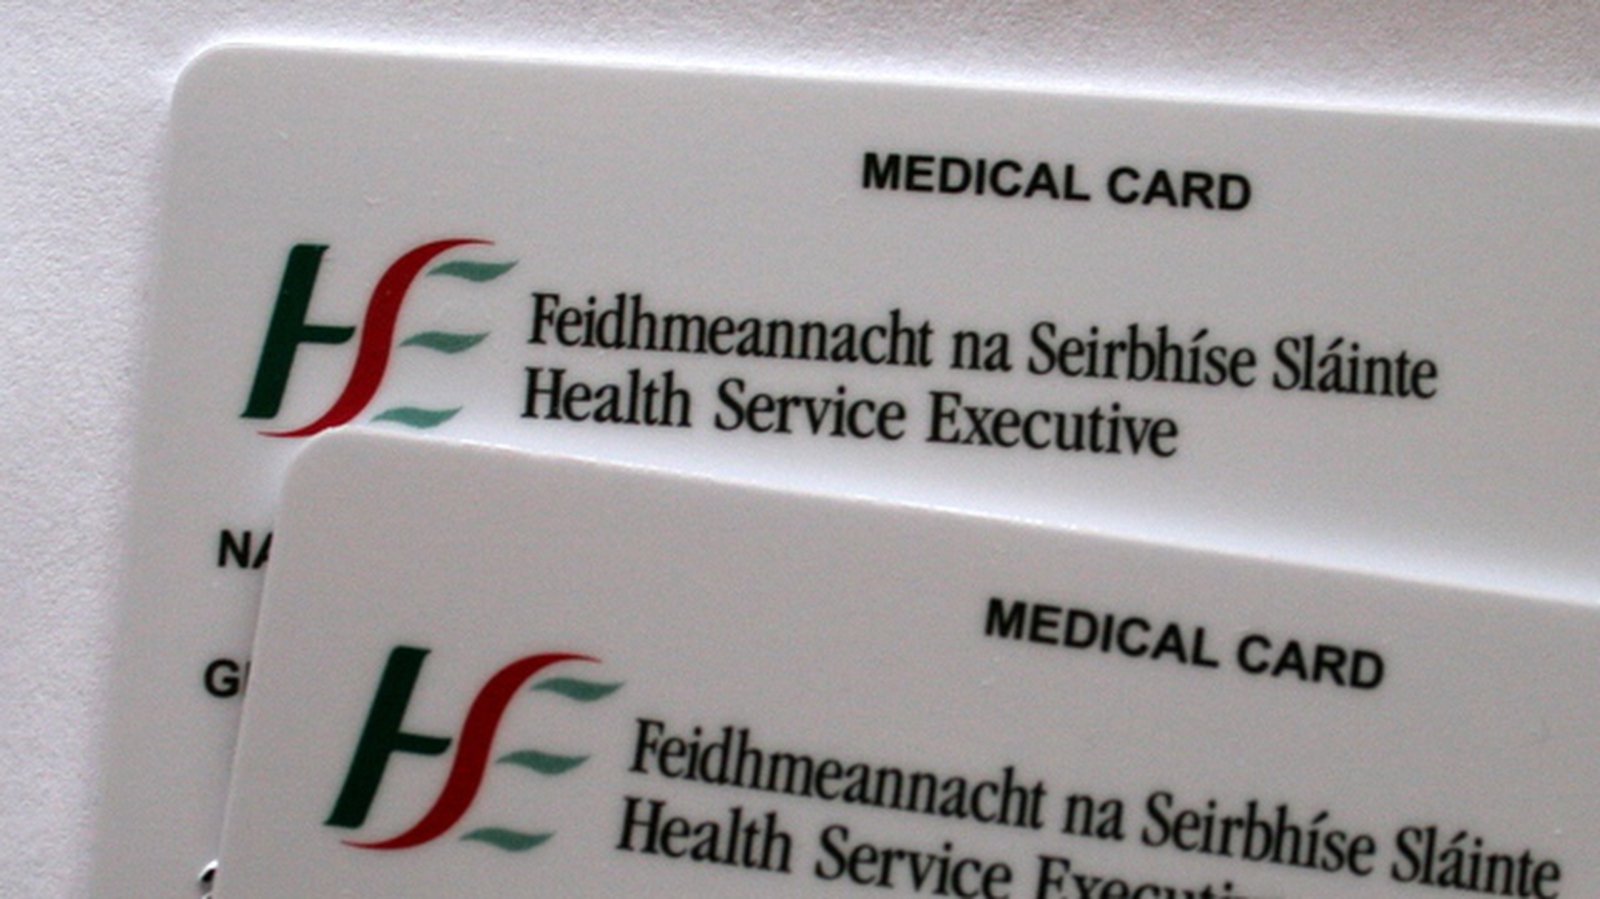 HSE aims to clarify medical card eligibility